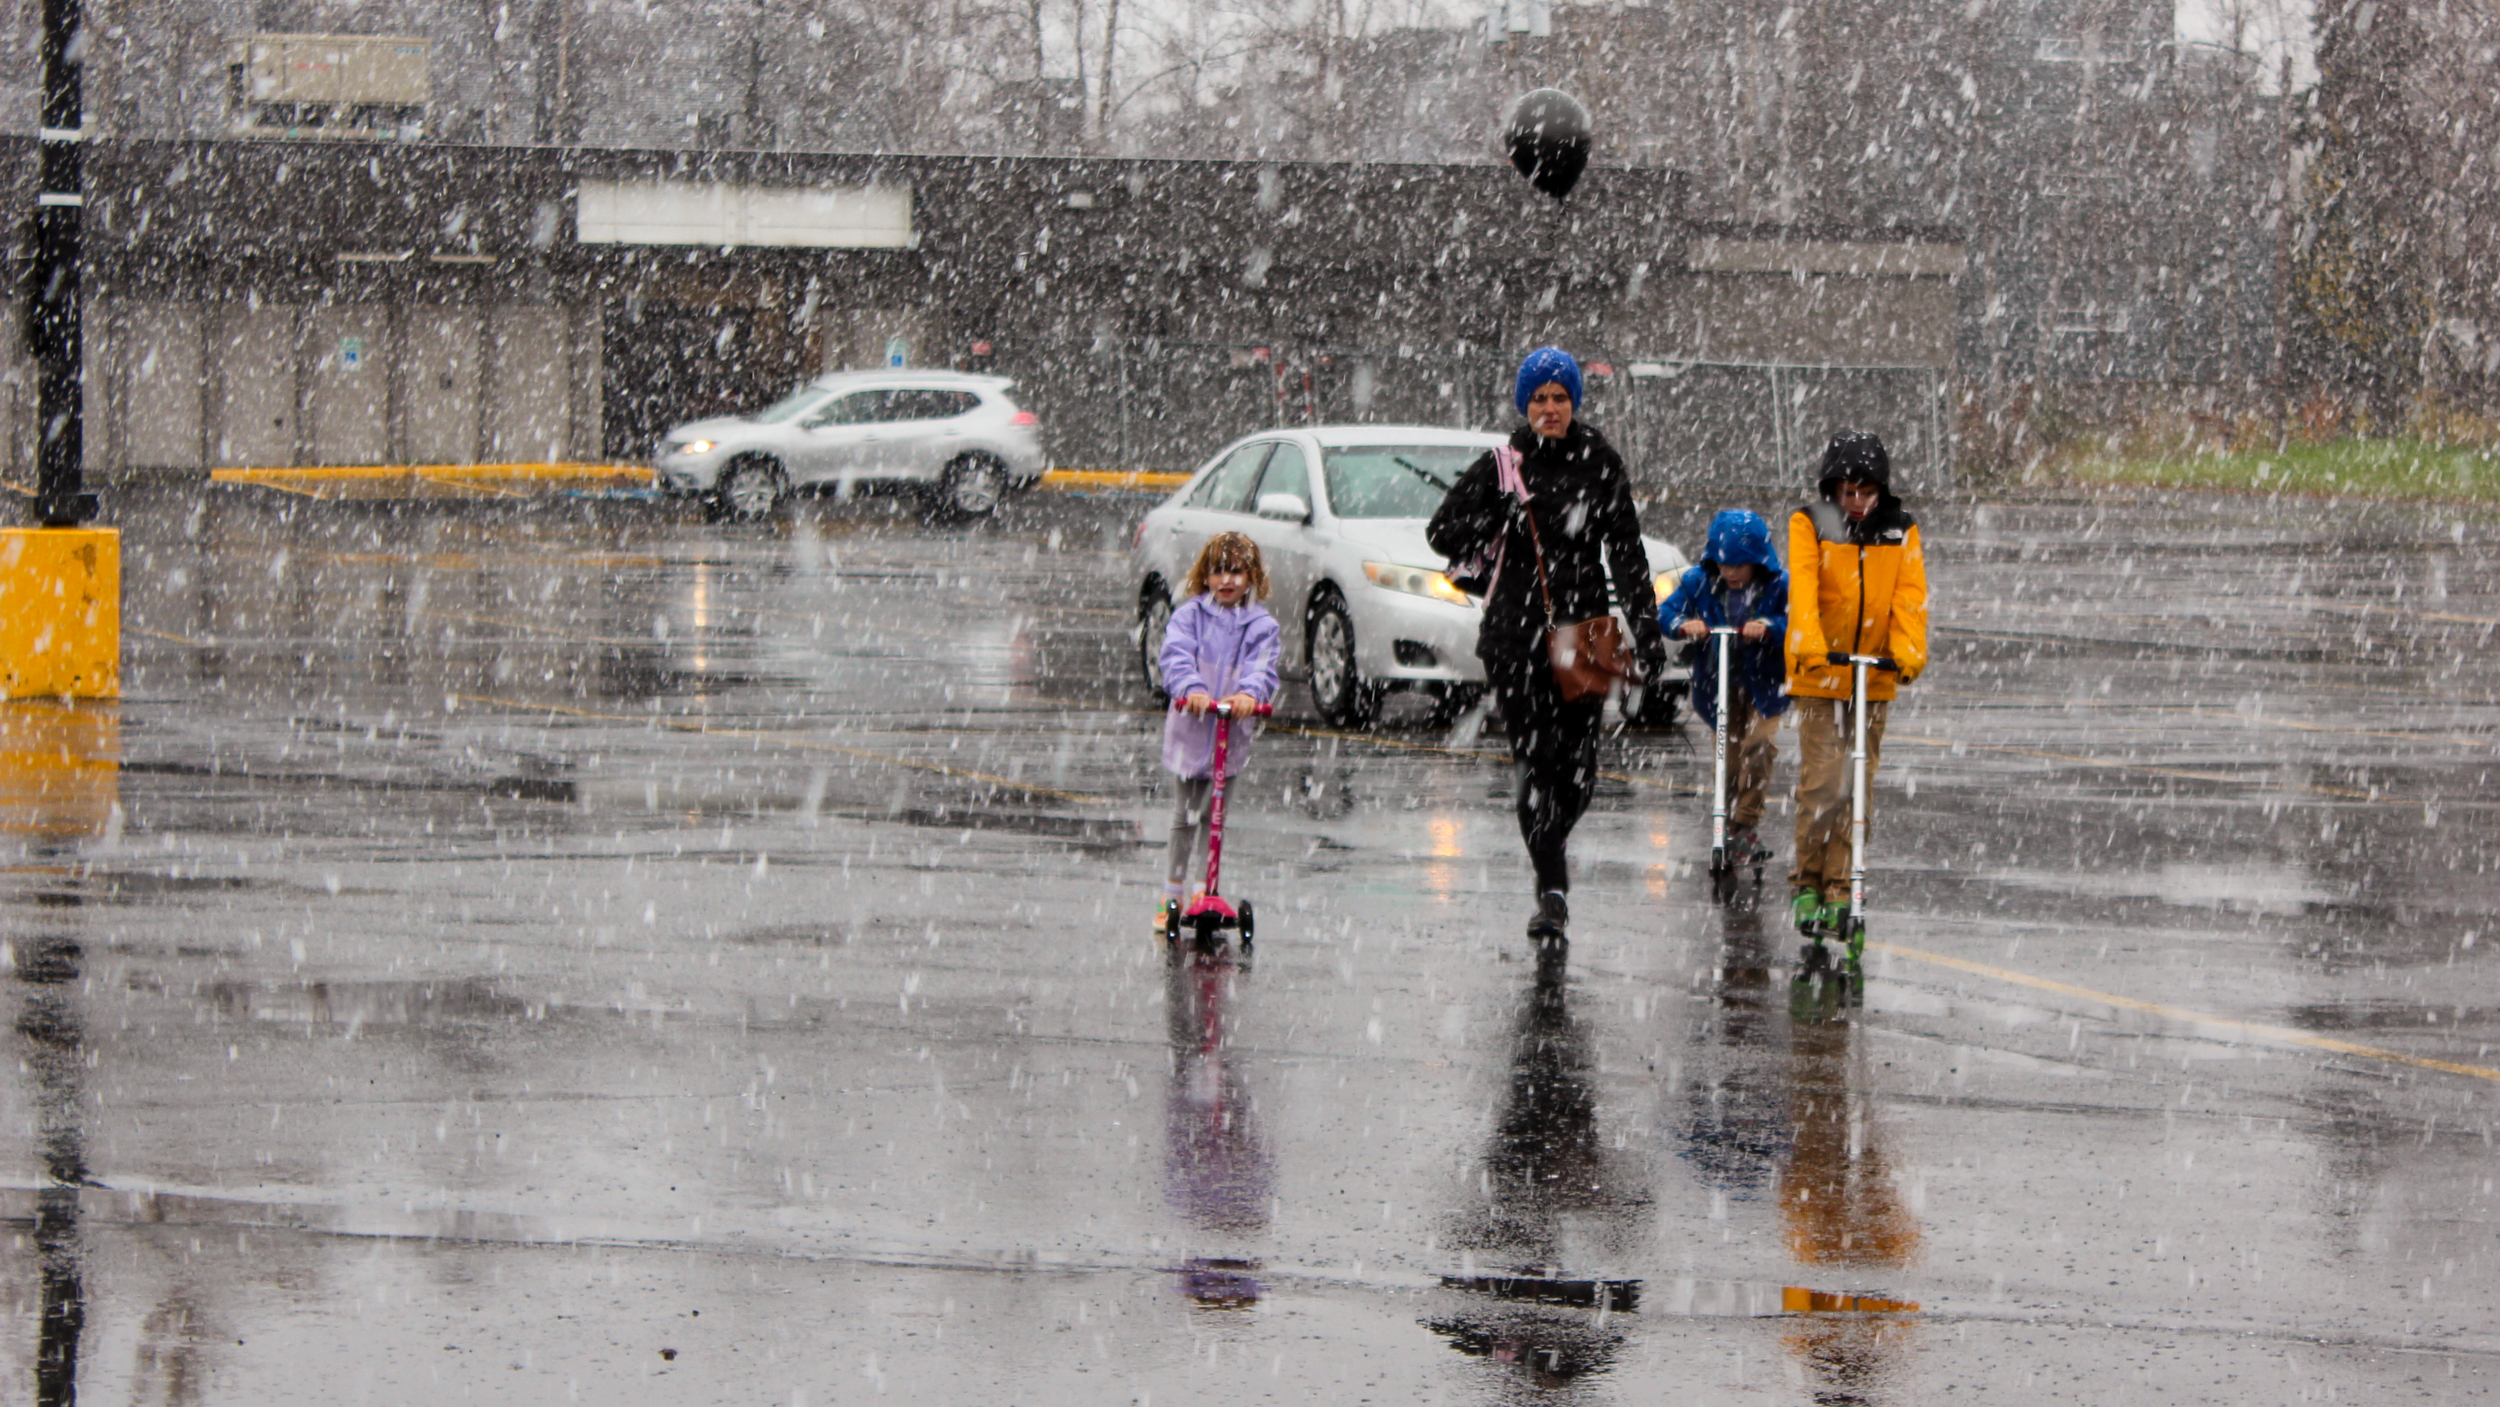 A mother holding a ballon walks through a parking lot while three children in jackets ride scooters.